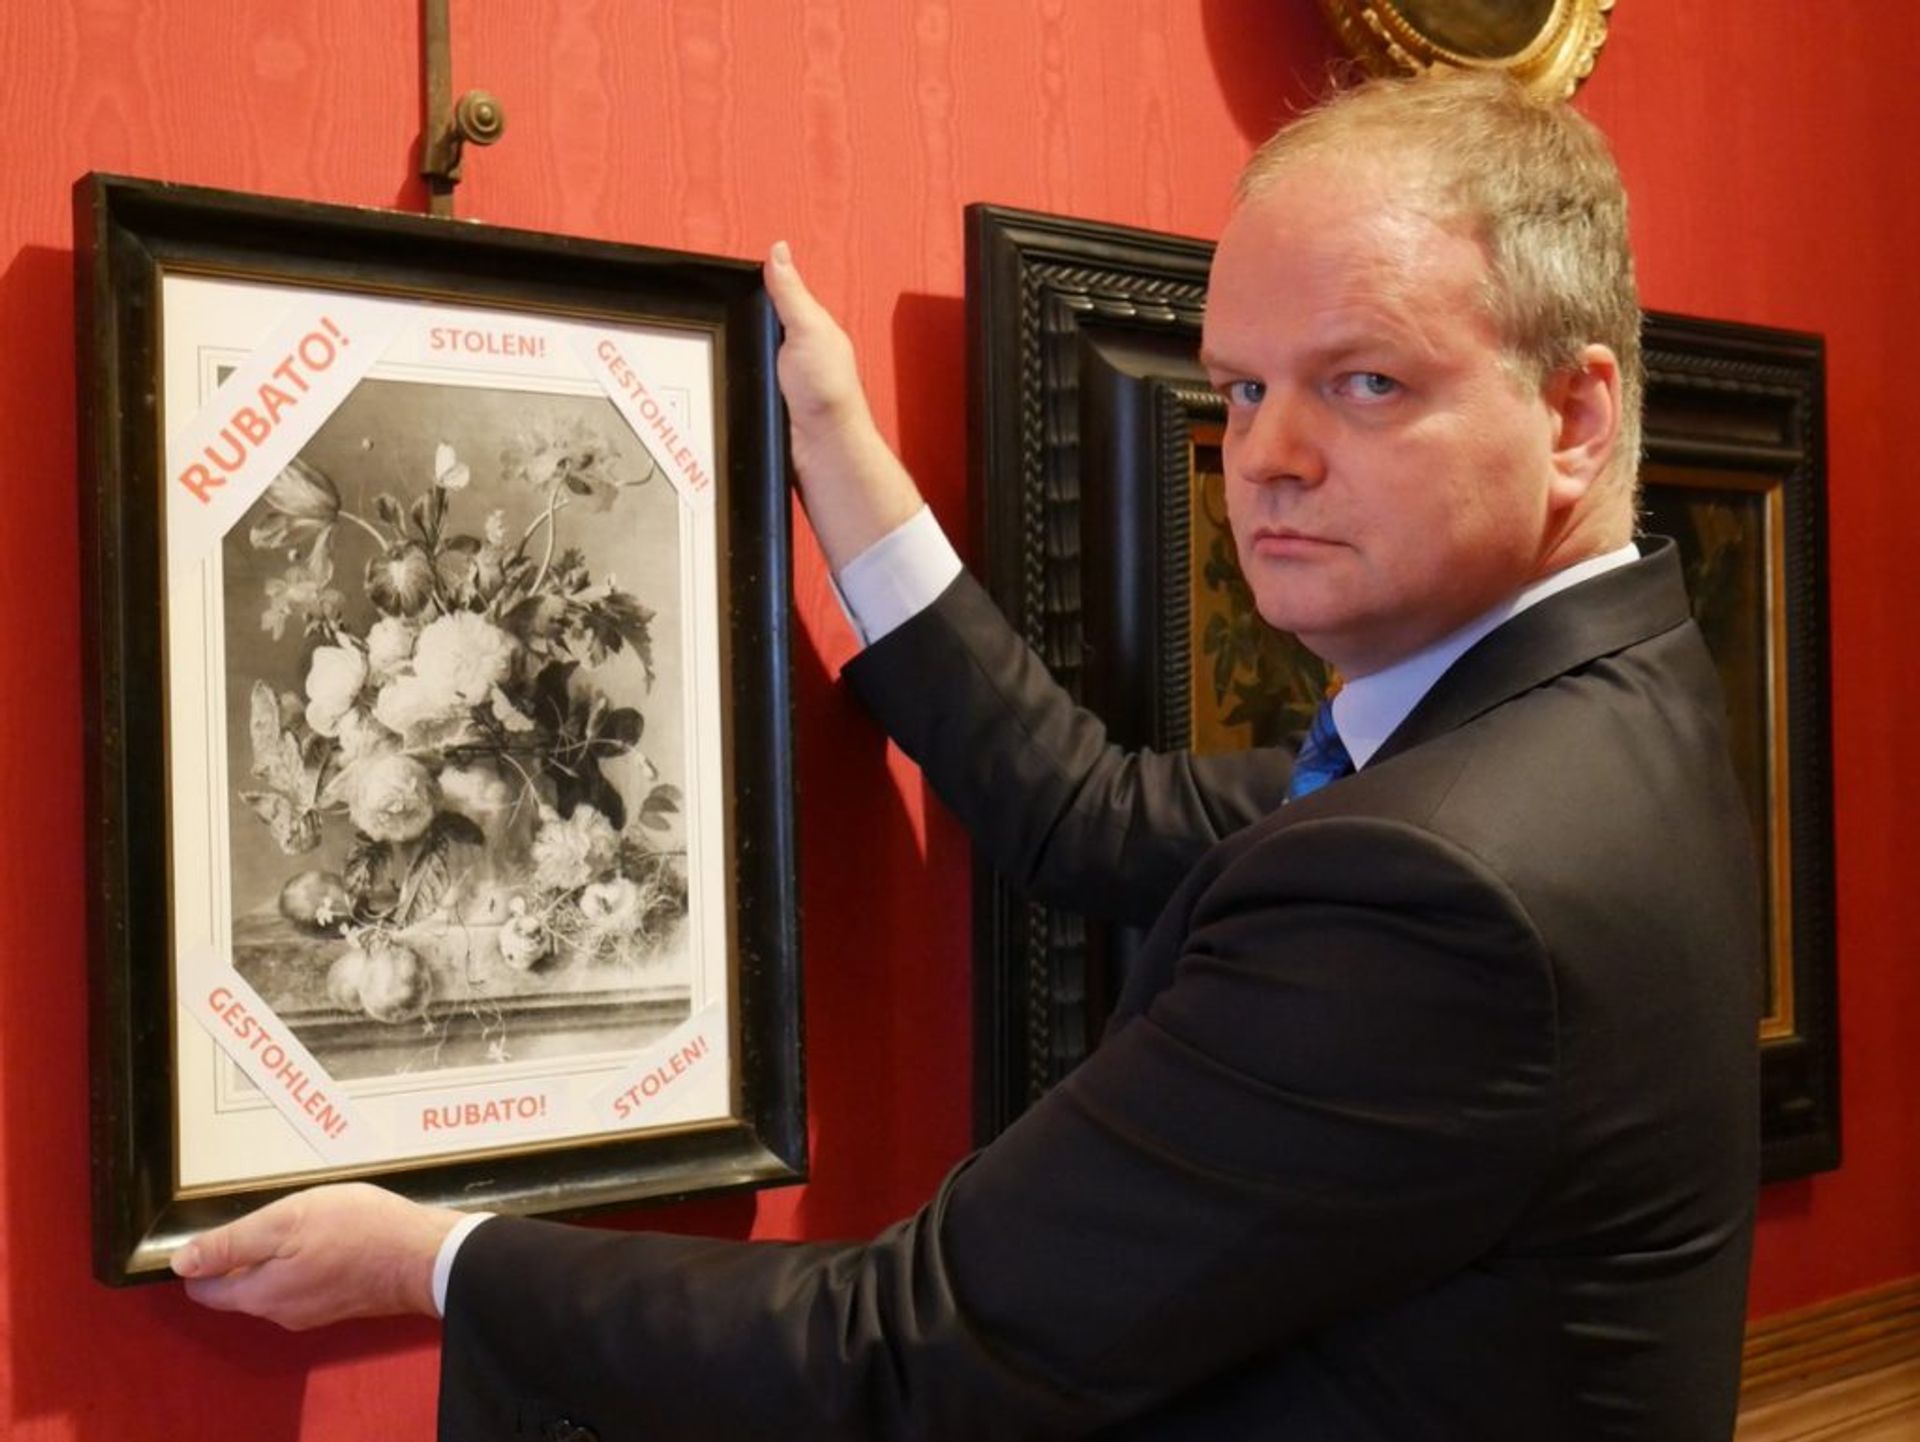 Uffizi director Eike Schmidt hung a reproduction of the work in the Pitti Palace in January Uffizi Galleries via Twitter